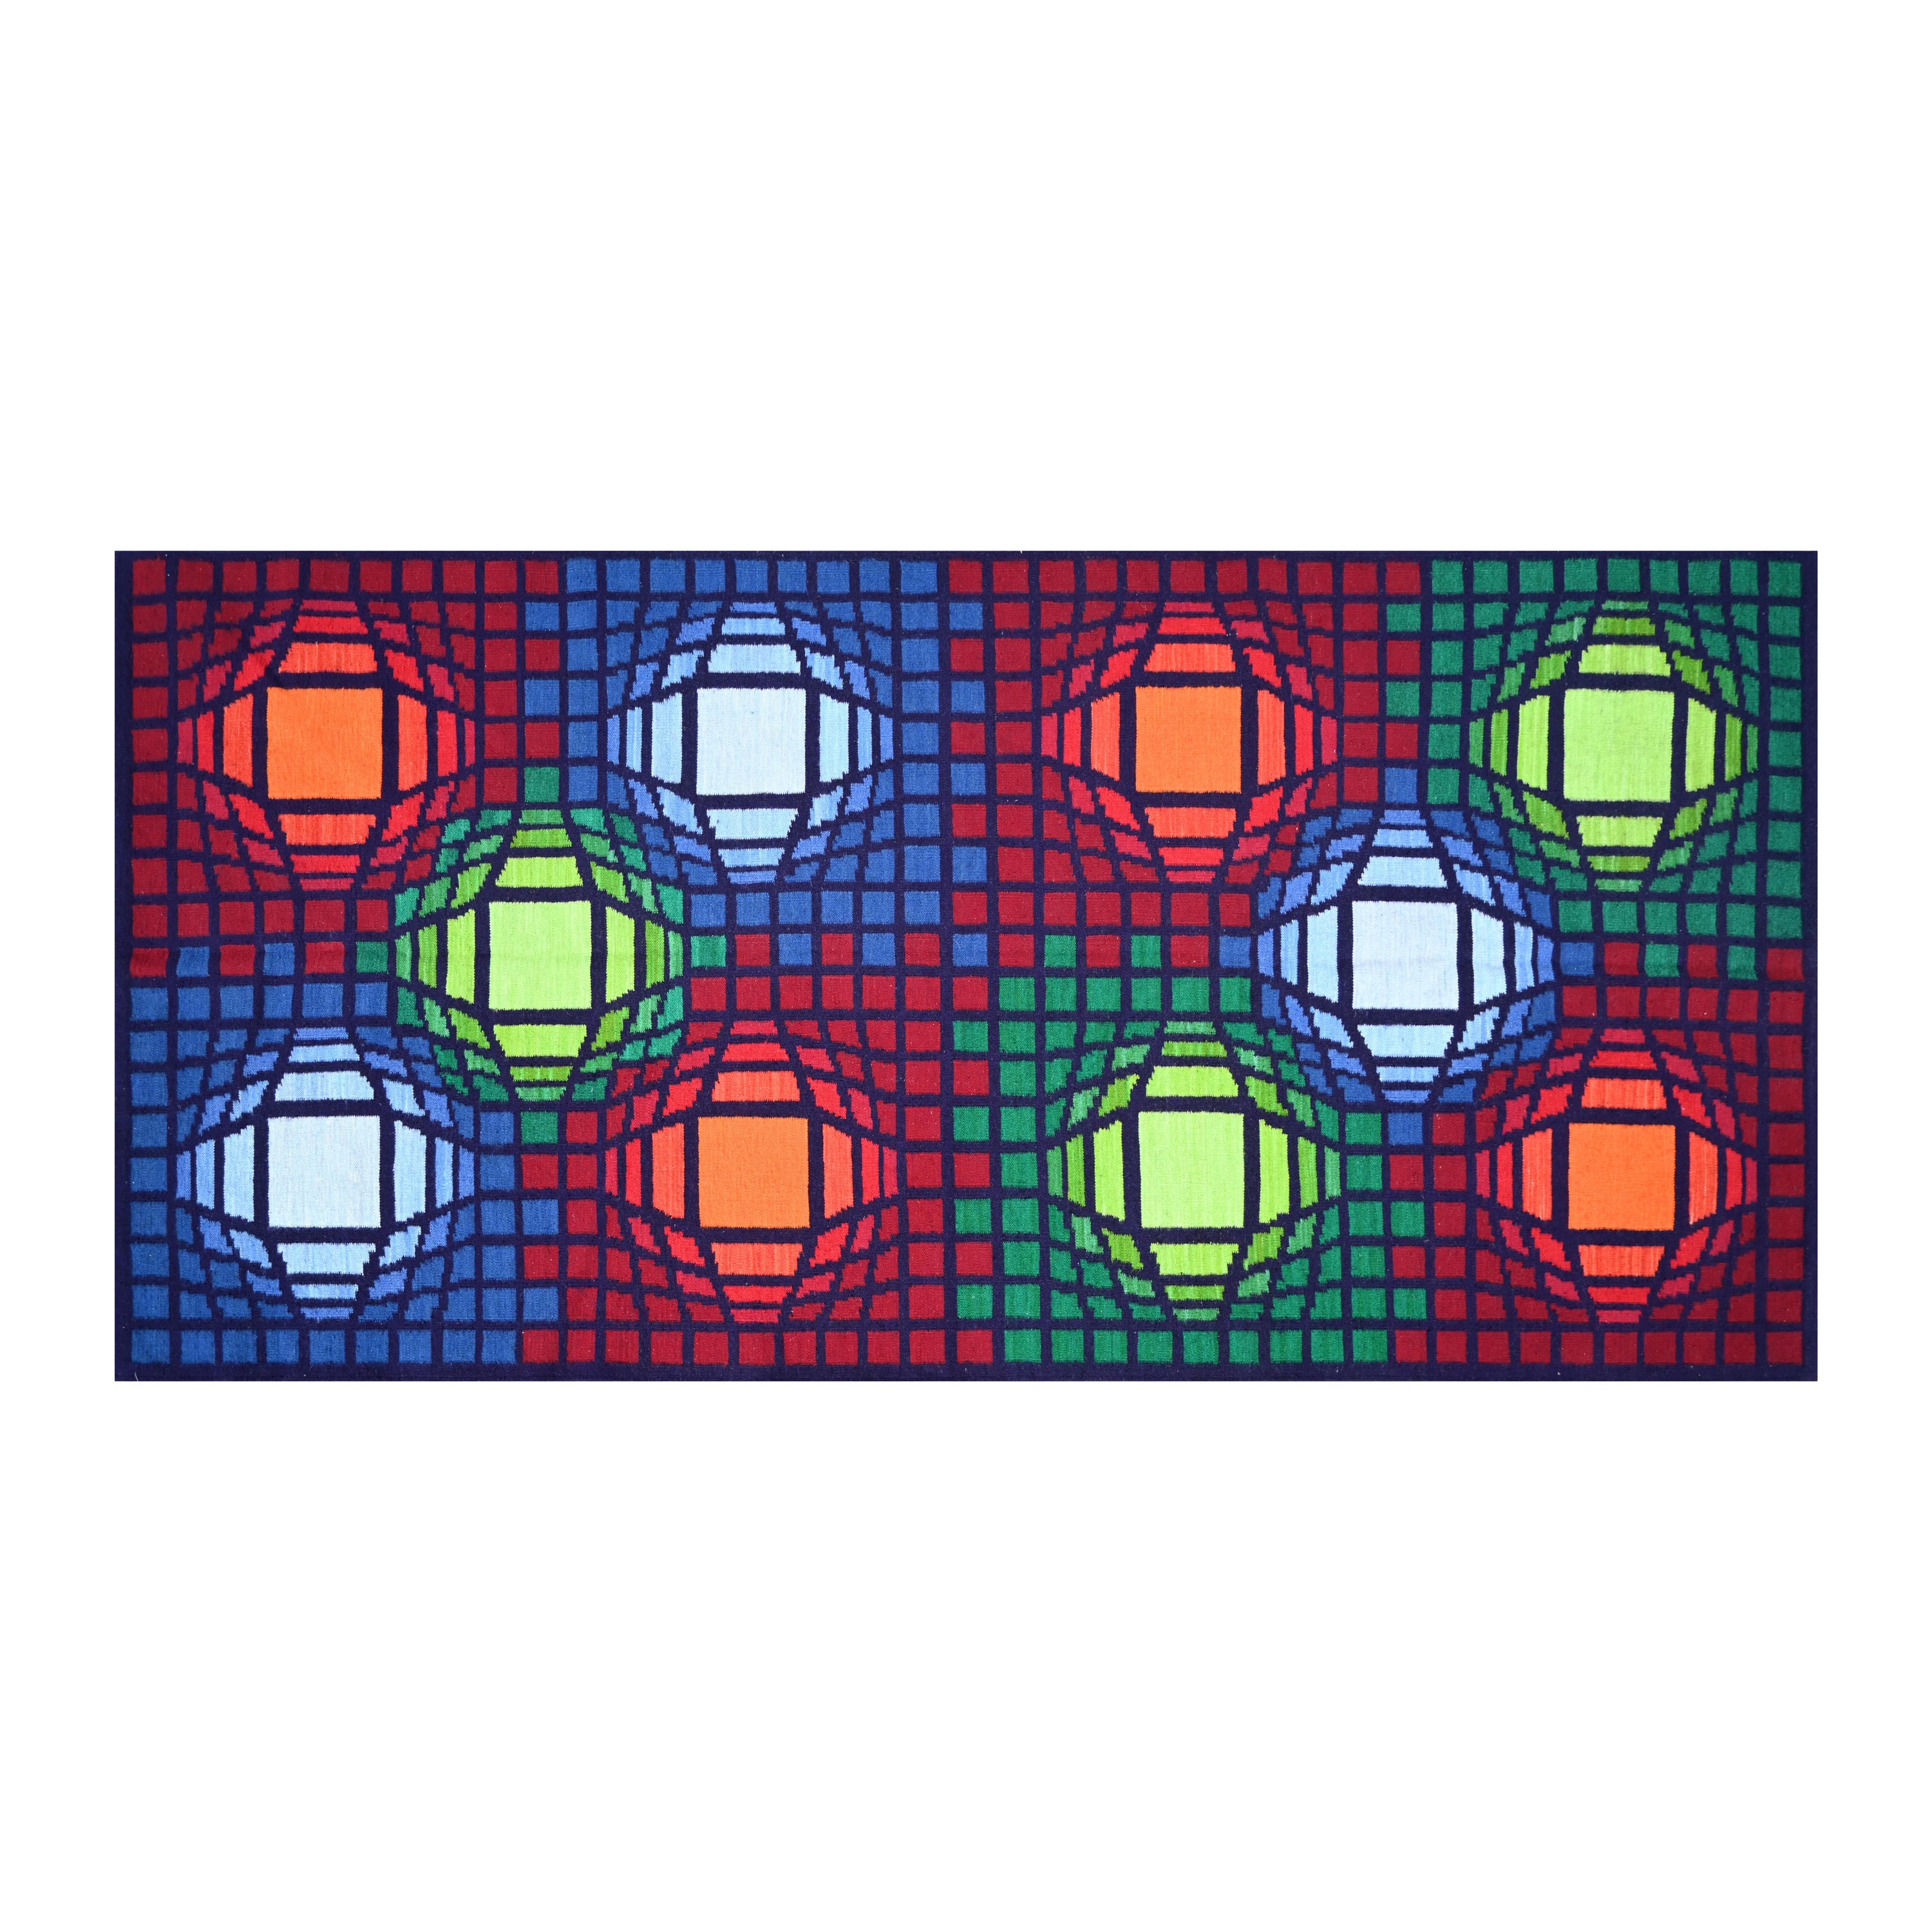 Kinetic Tapestry LM1985 Signed Jakubczyk - In the style of Vasarely - No. 1377 For Sale